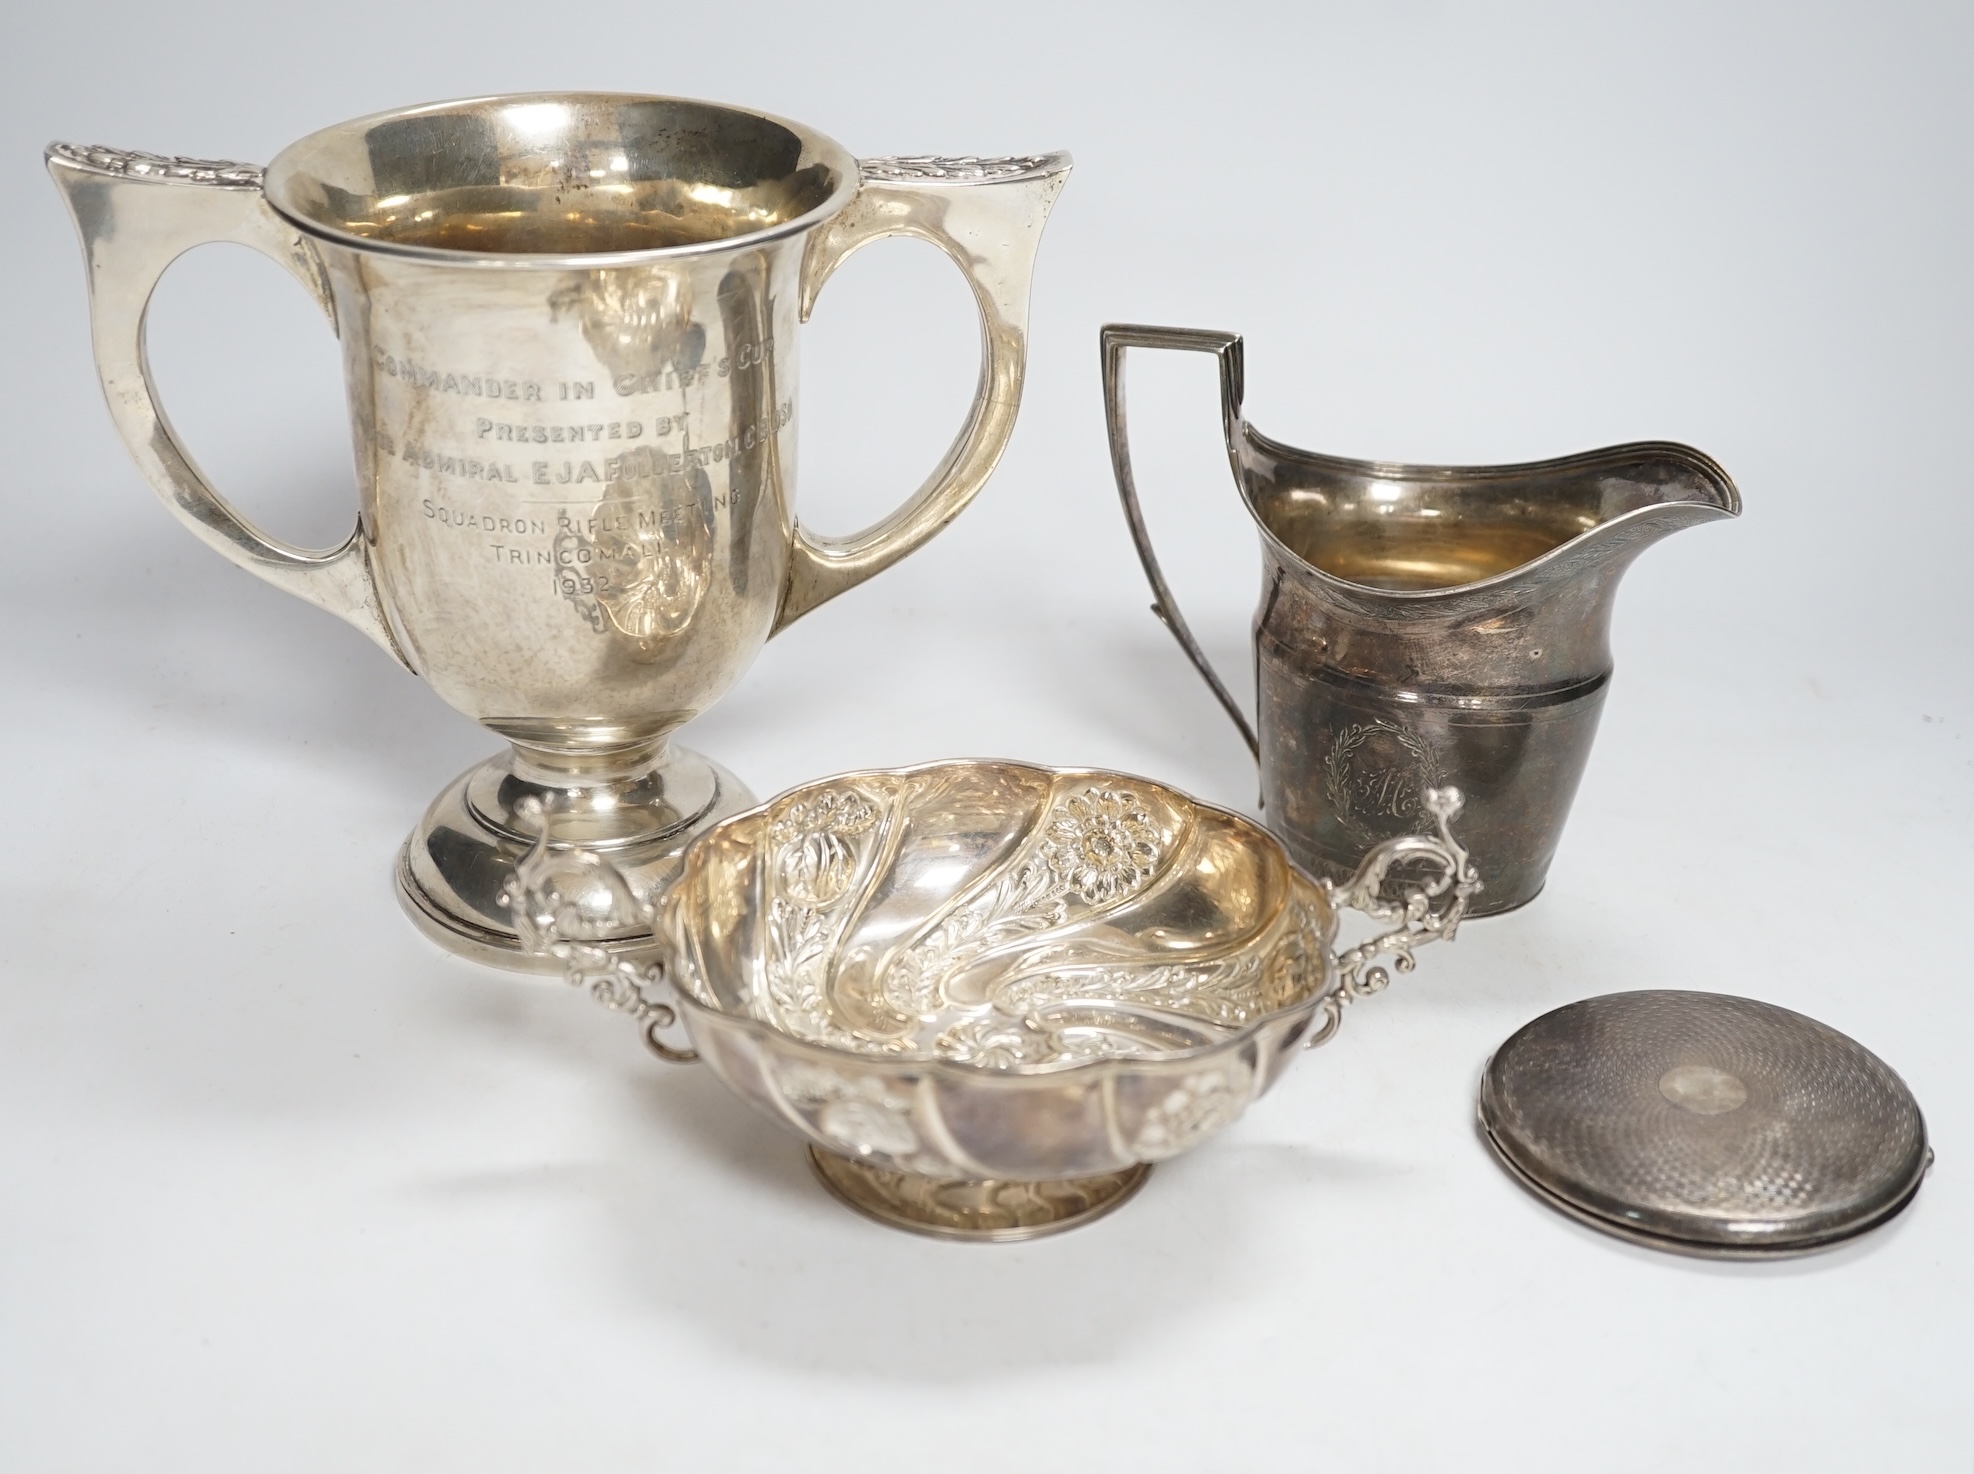 A George III engraved silver helmet shaped cream jug, John Eames, London, 1798, 11.1cm, a Japanese Suzuyo 950 white metal two handled shallow bowl, a George V silver two handled presentation trophy cup and a silver circu